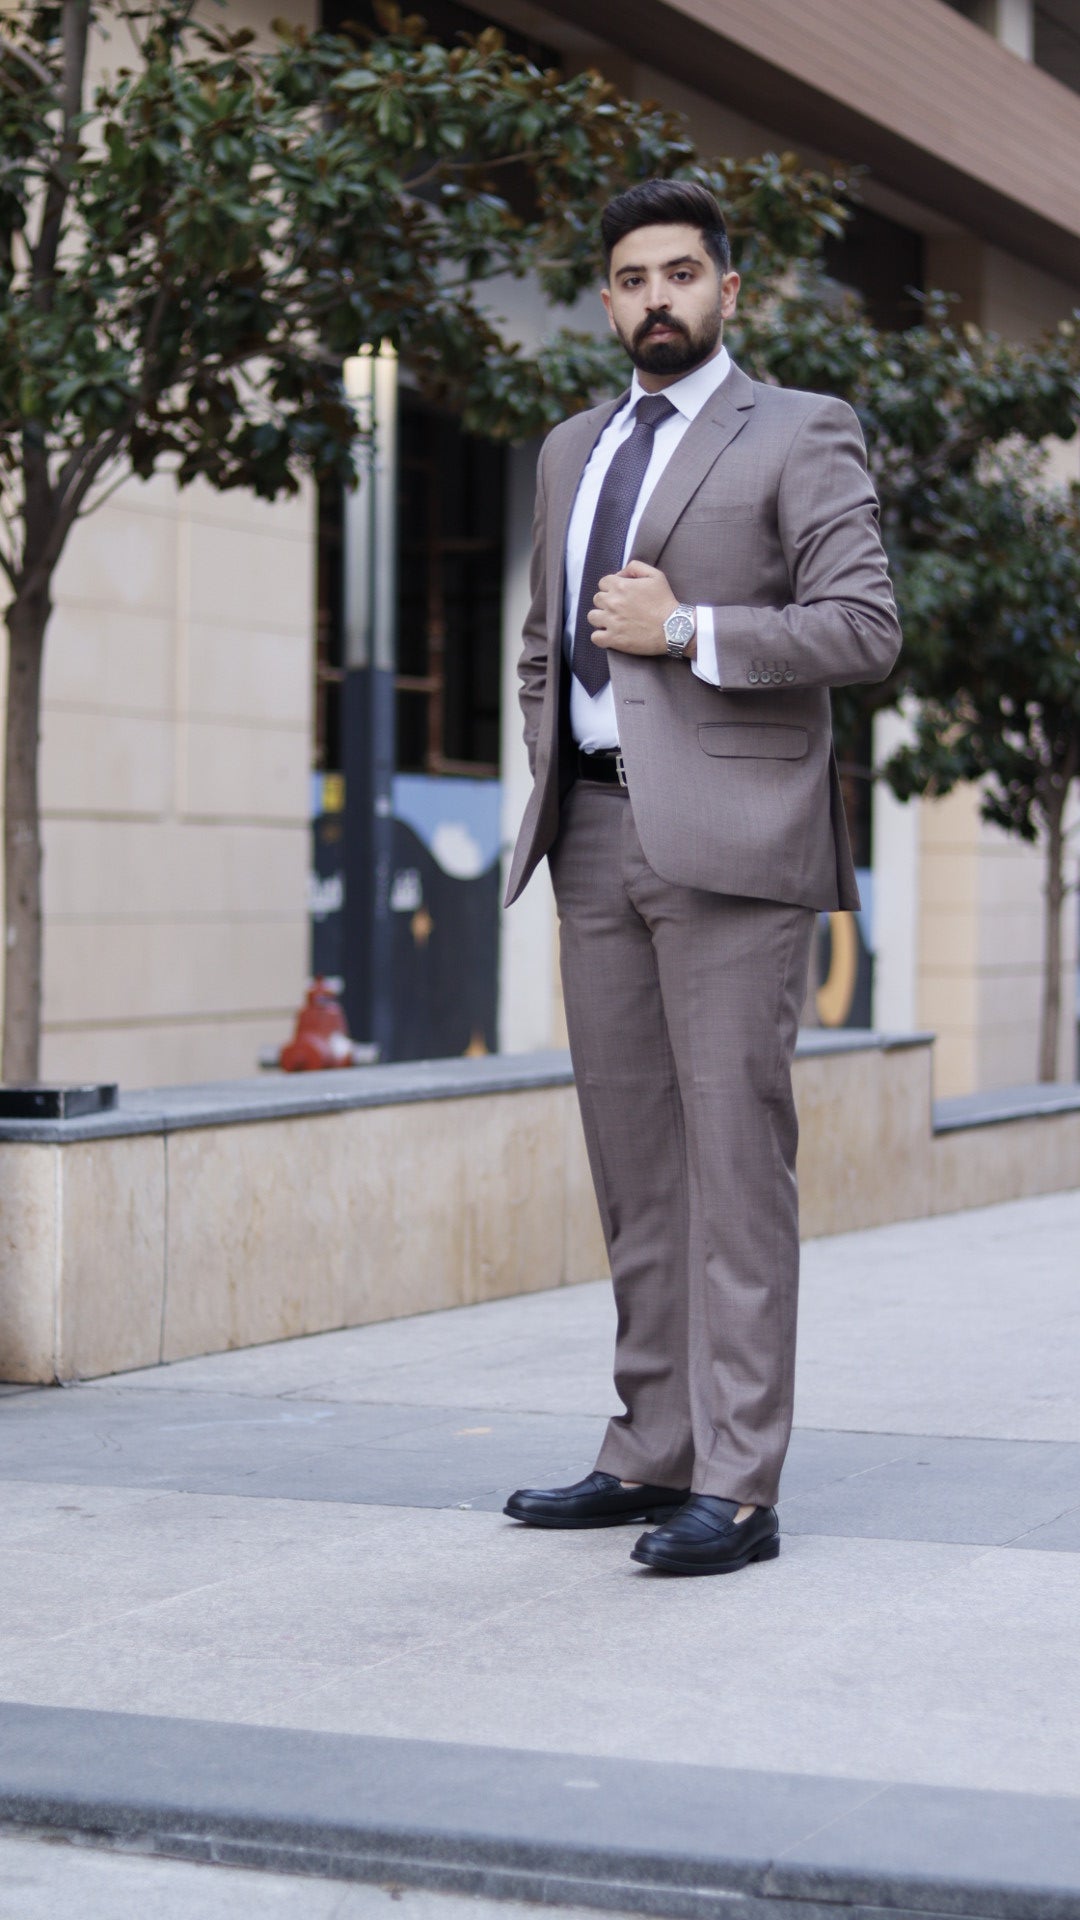 The Manager Suit - High Quality Men's Suit